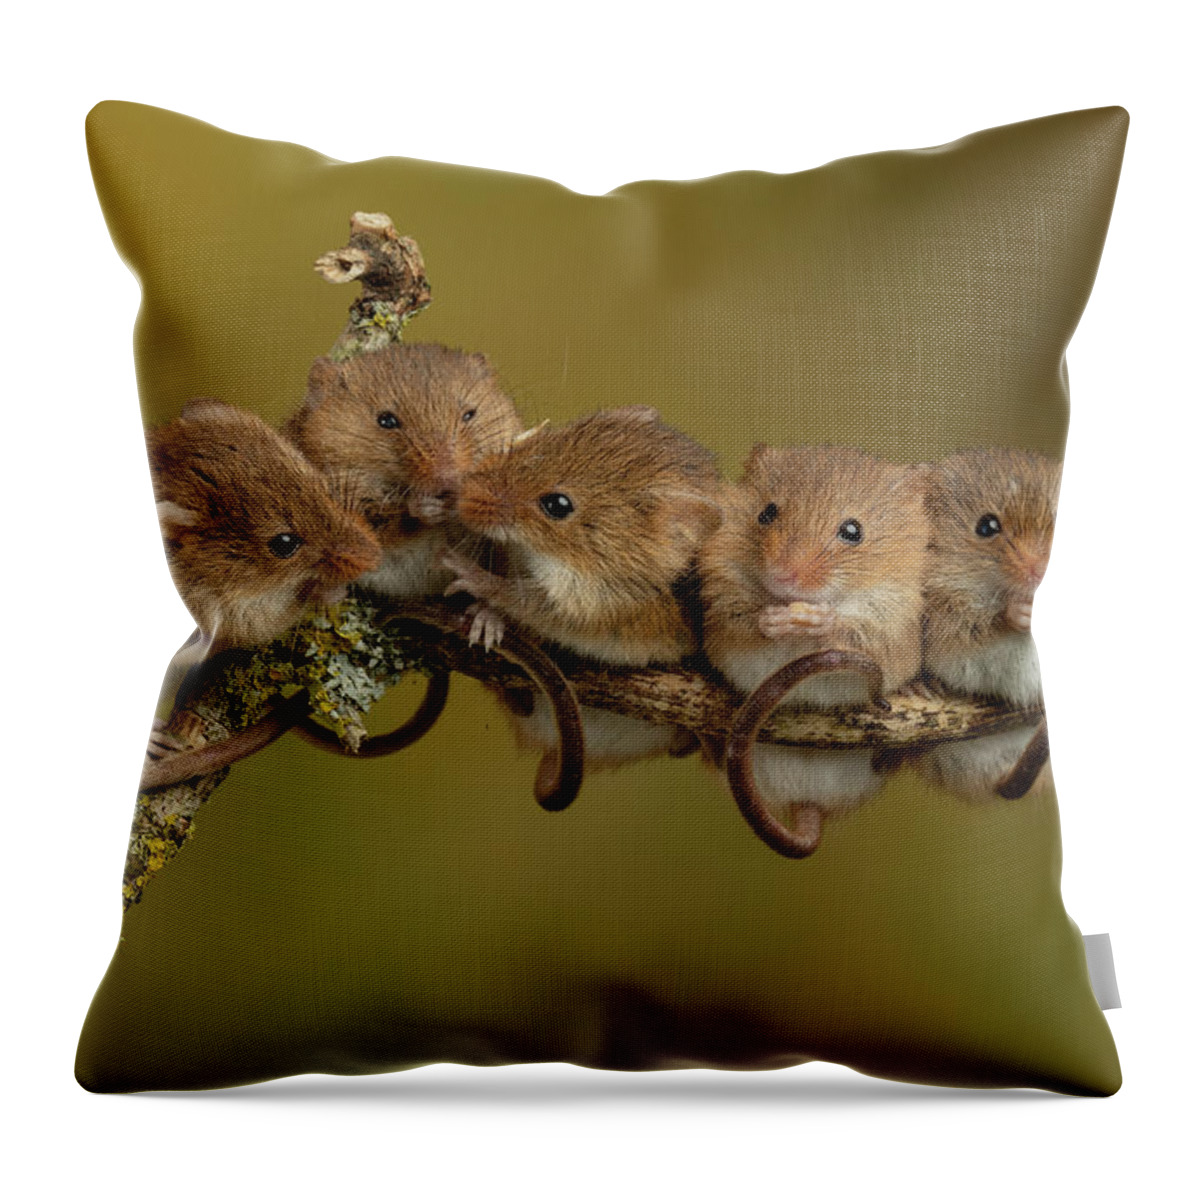 Harvest Throw Pillow featuring the photograph Hm-4677 by Miles Herbert